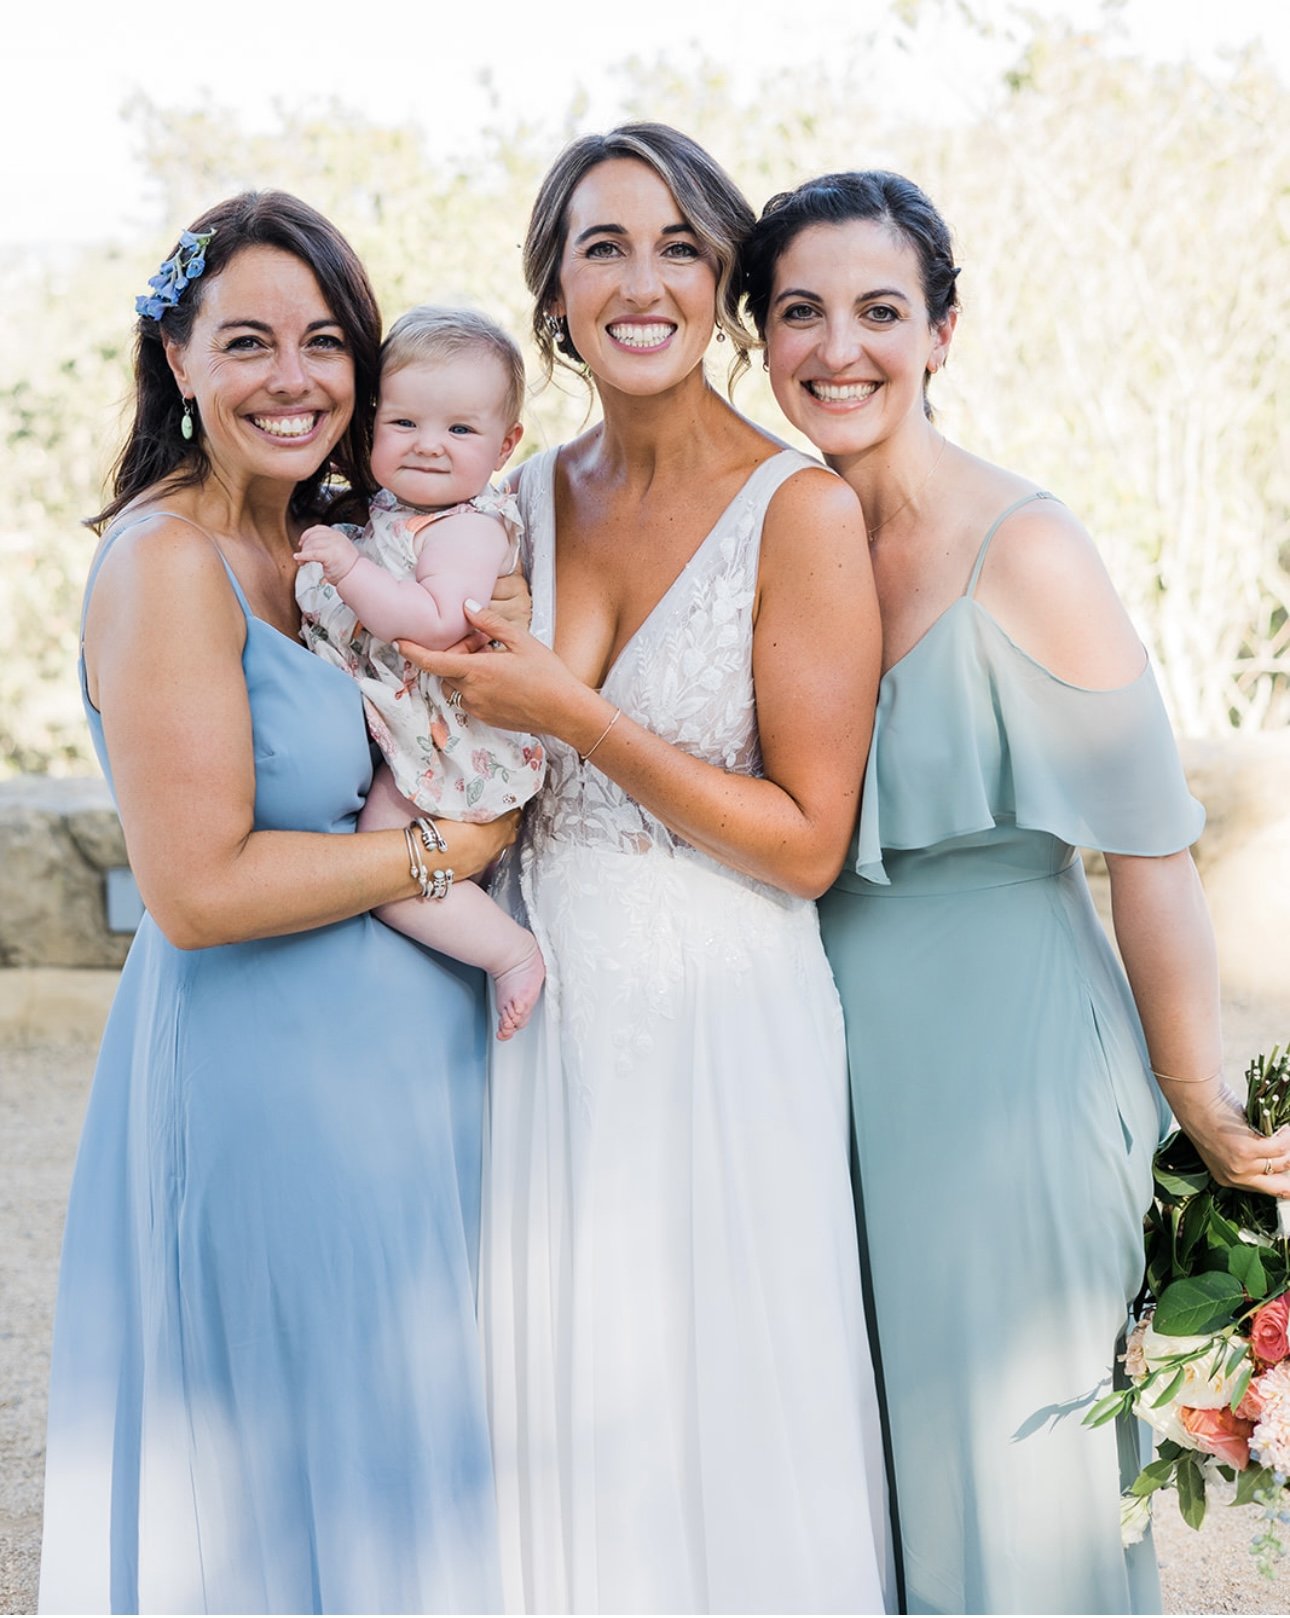 www.santabarbarawedding.com | RG Photography | Events by Fran | Godric Grove | Tangled Lotus | Bride with Two Bridesmaids and Baby